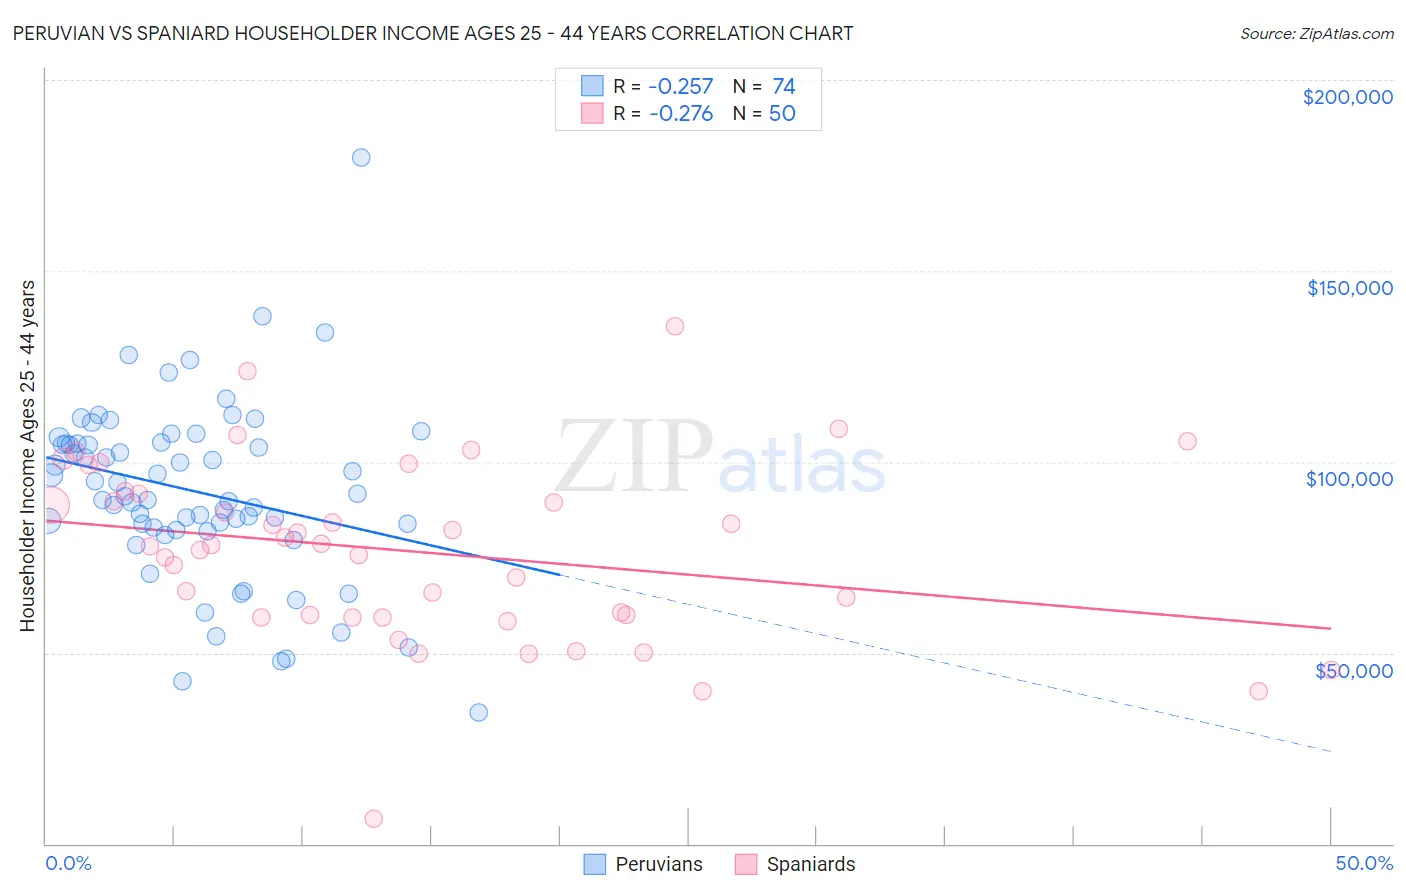 Peruvian vs Spaniard Householder Income Ages 25 - 44 years